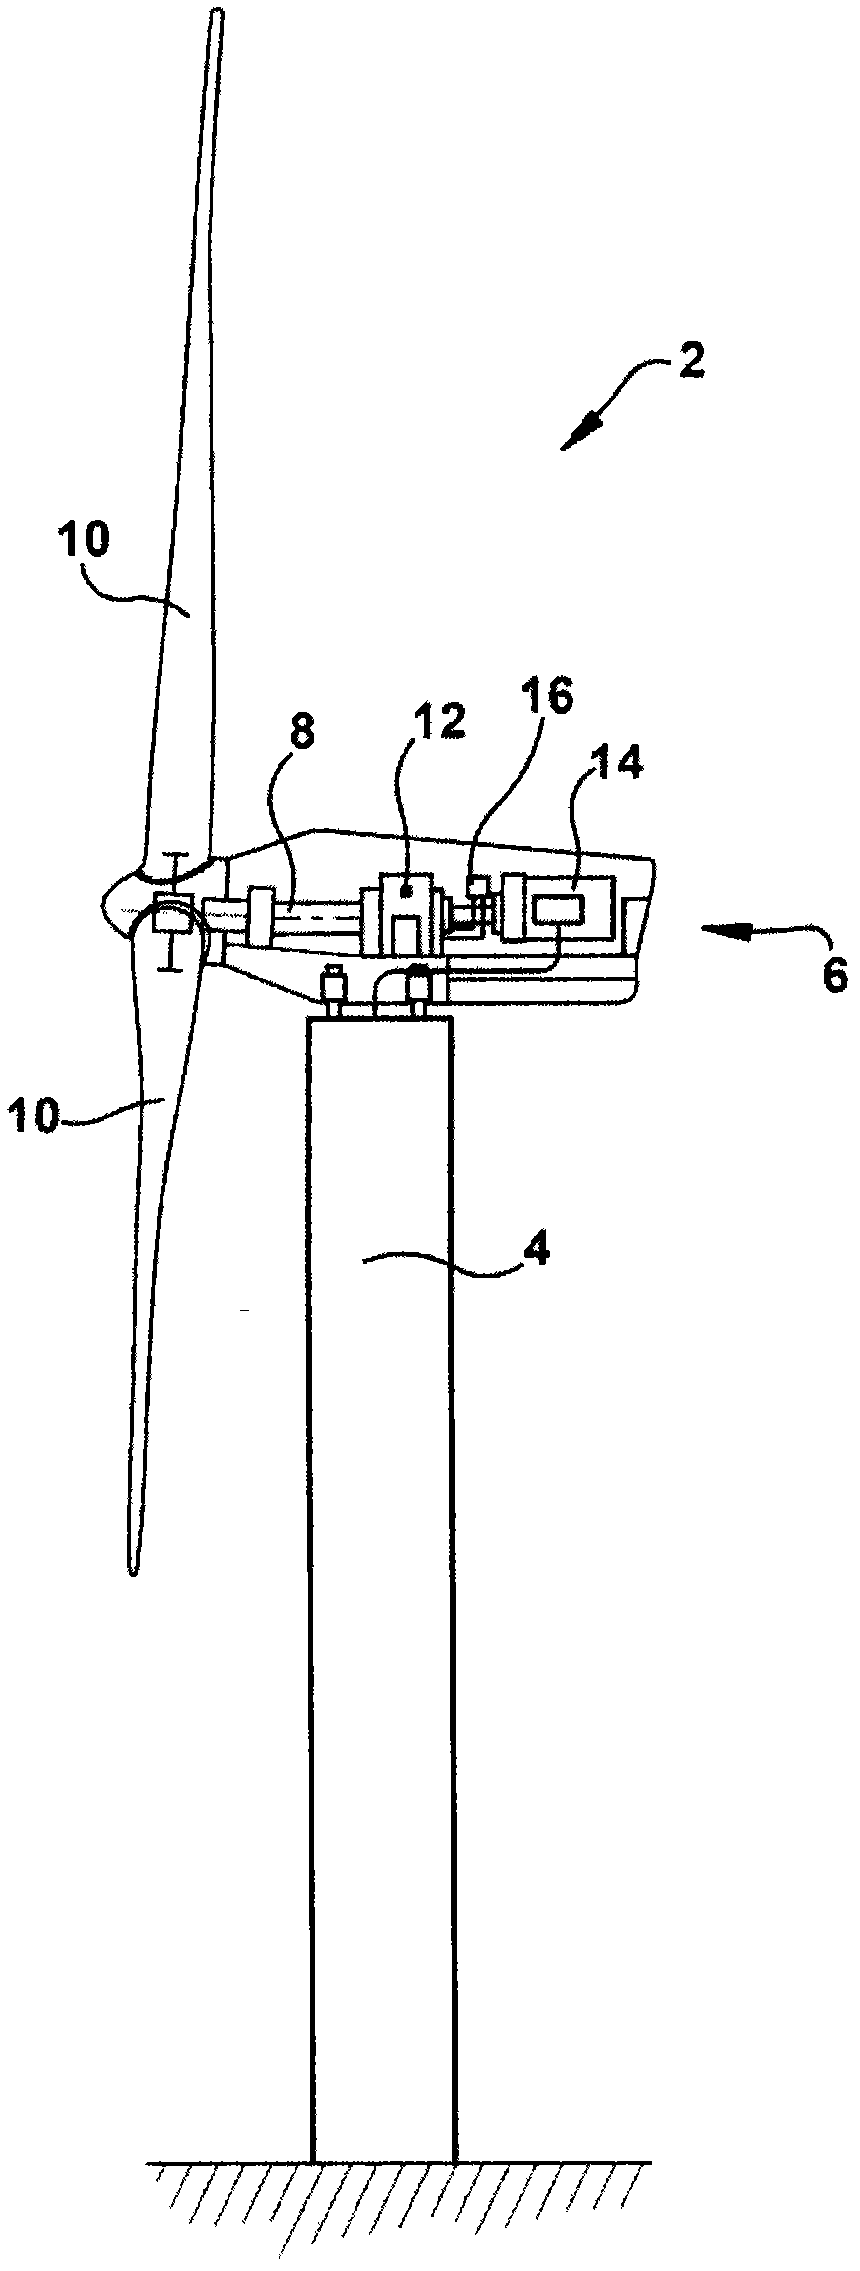 Methods of manufacture of wind turbine blades and other structures